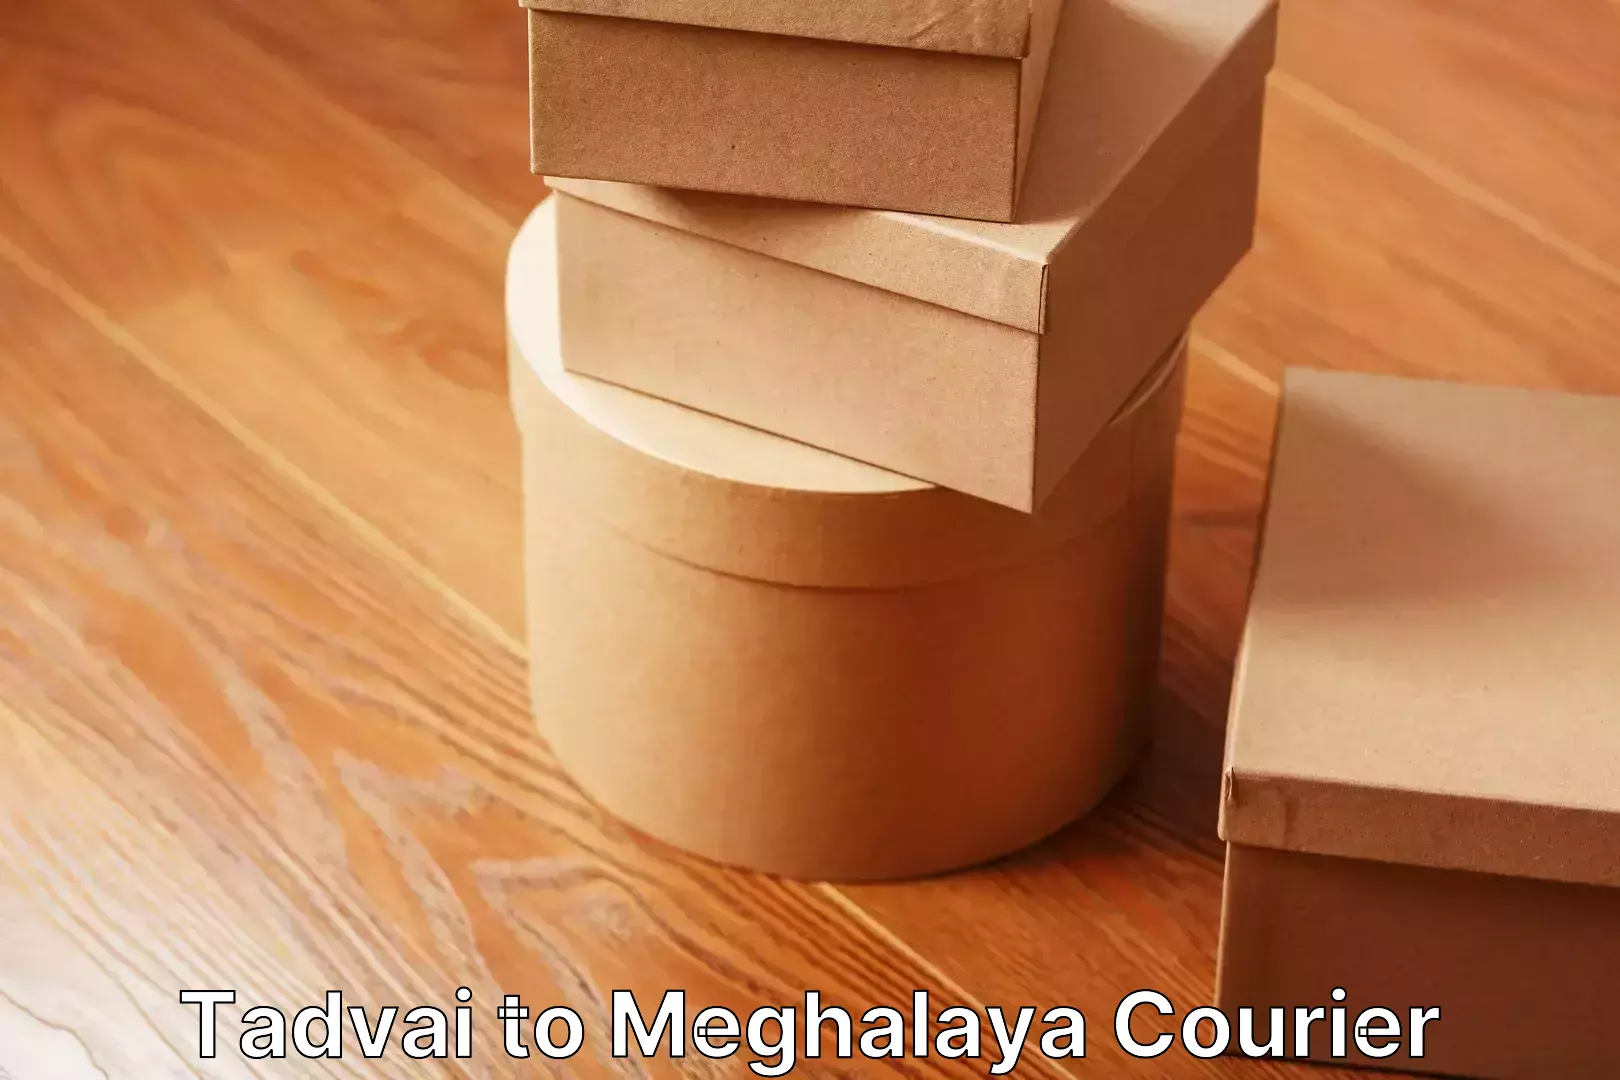 Full-service household moving in Tadvai to Meghalaya